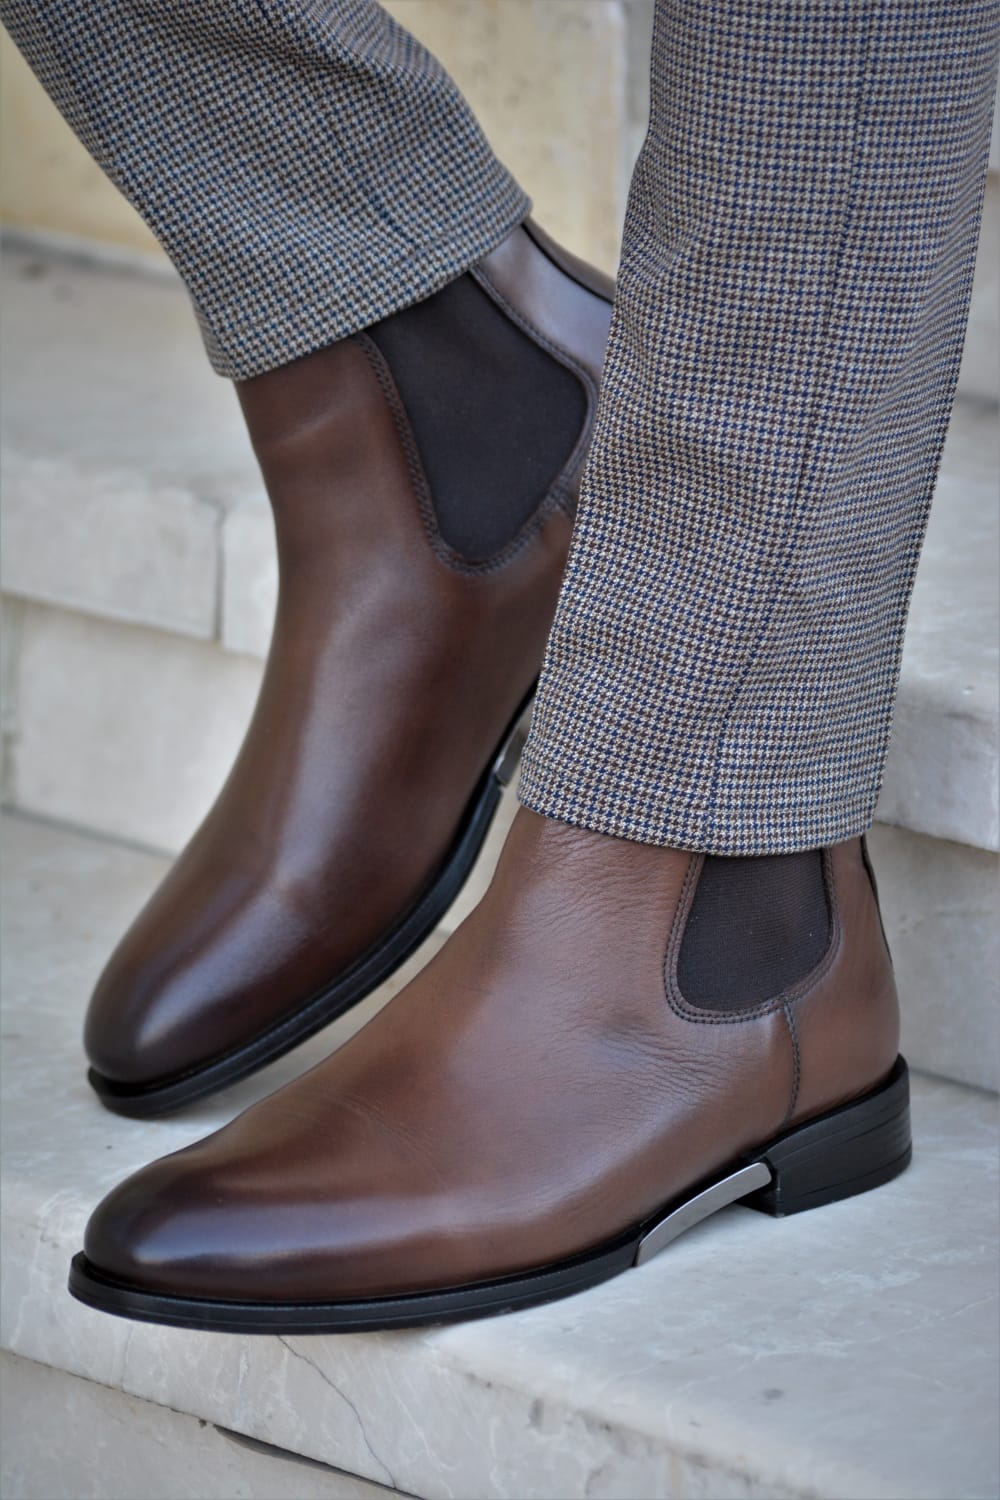 4 Excellent Shoe Styles To Party In This Season by GentWith Blog